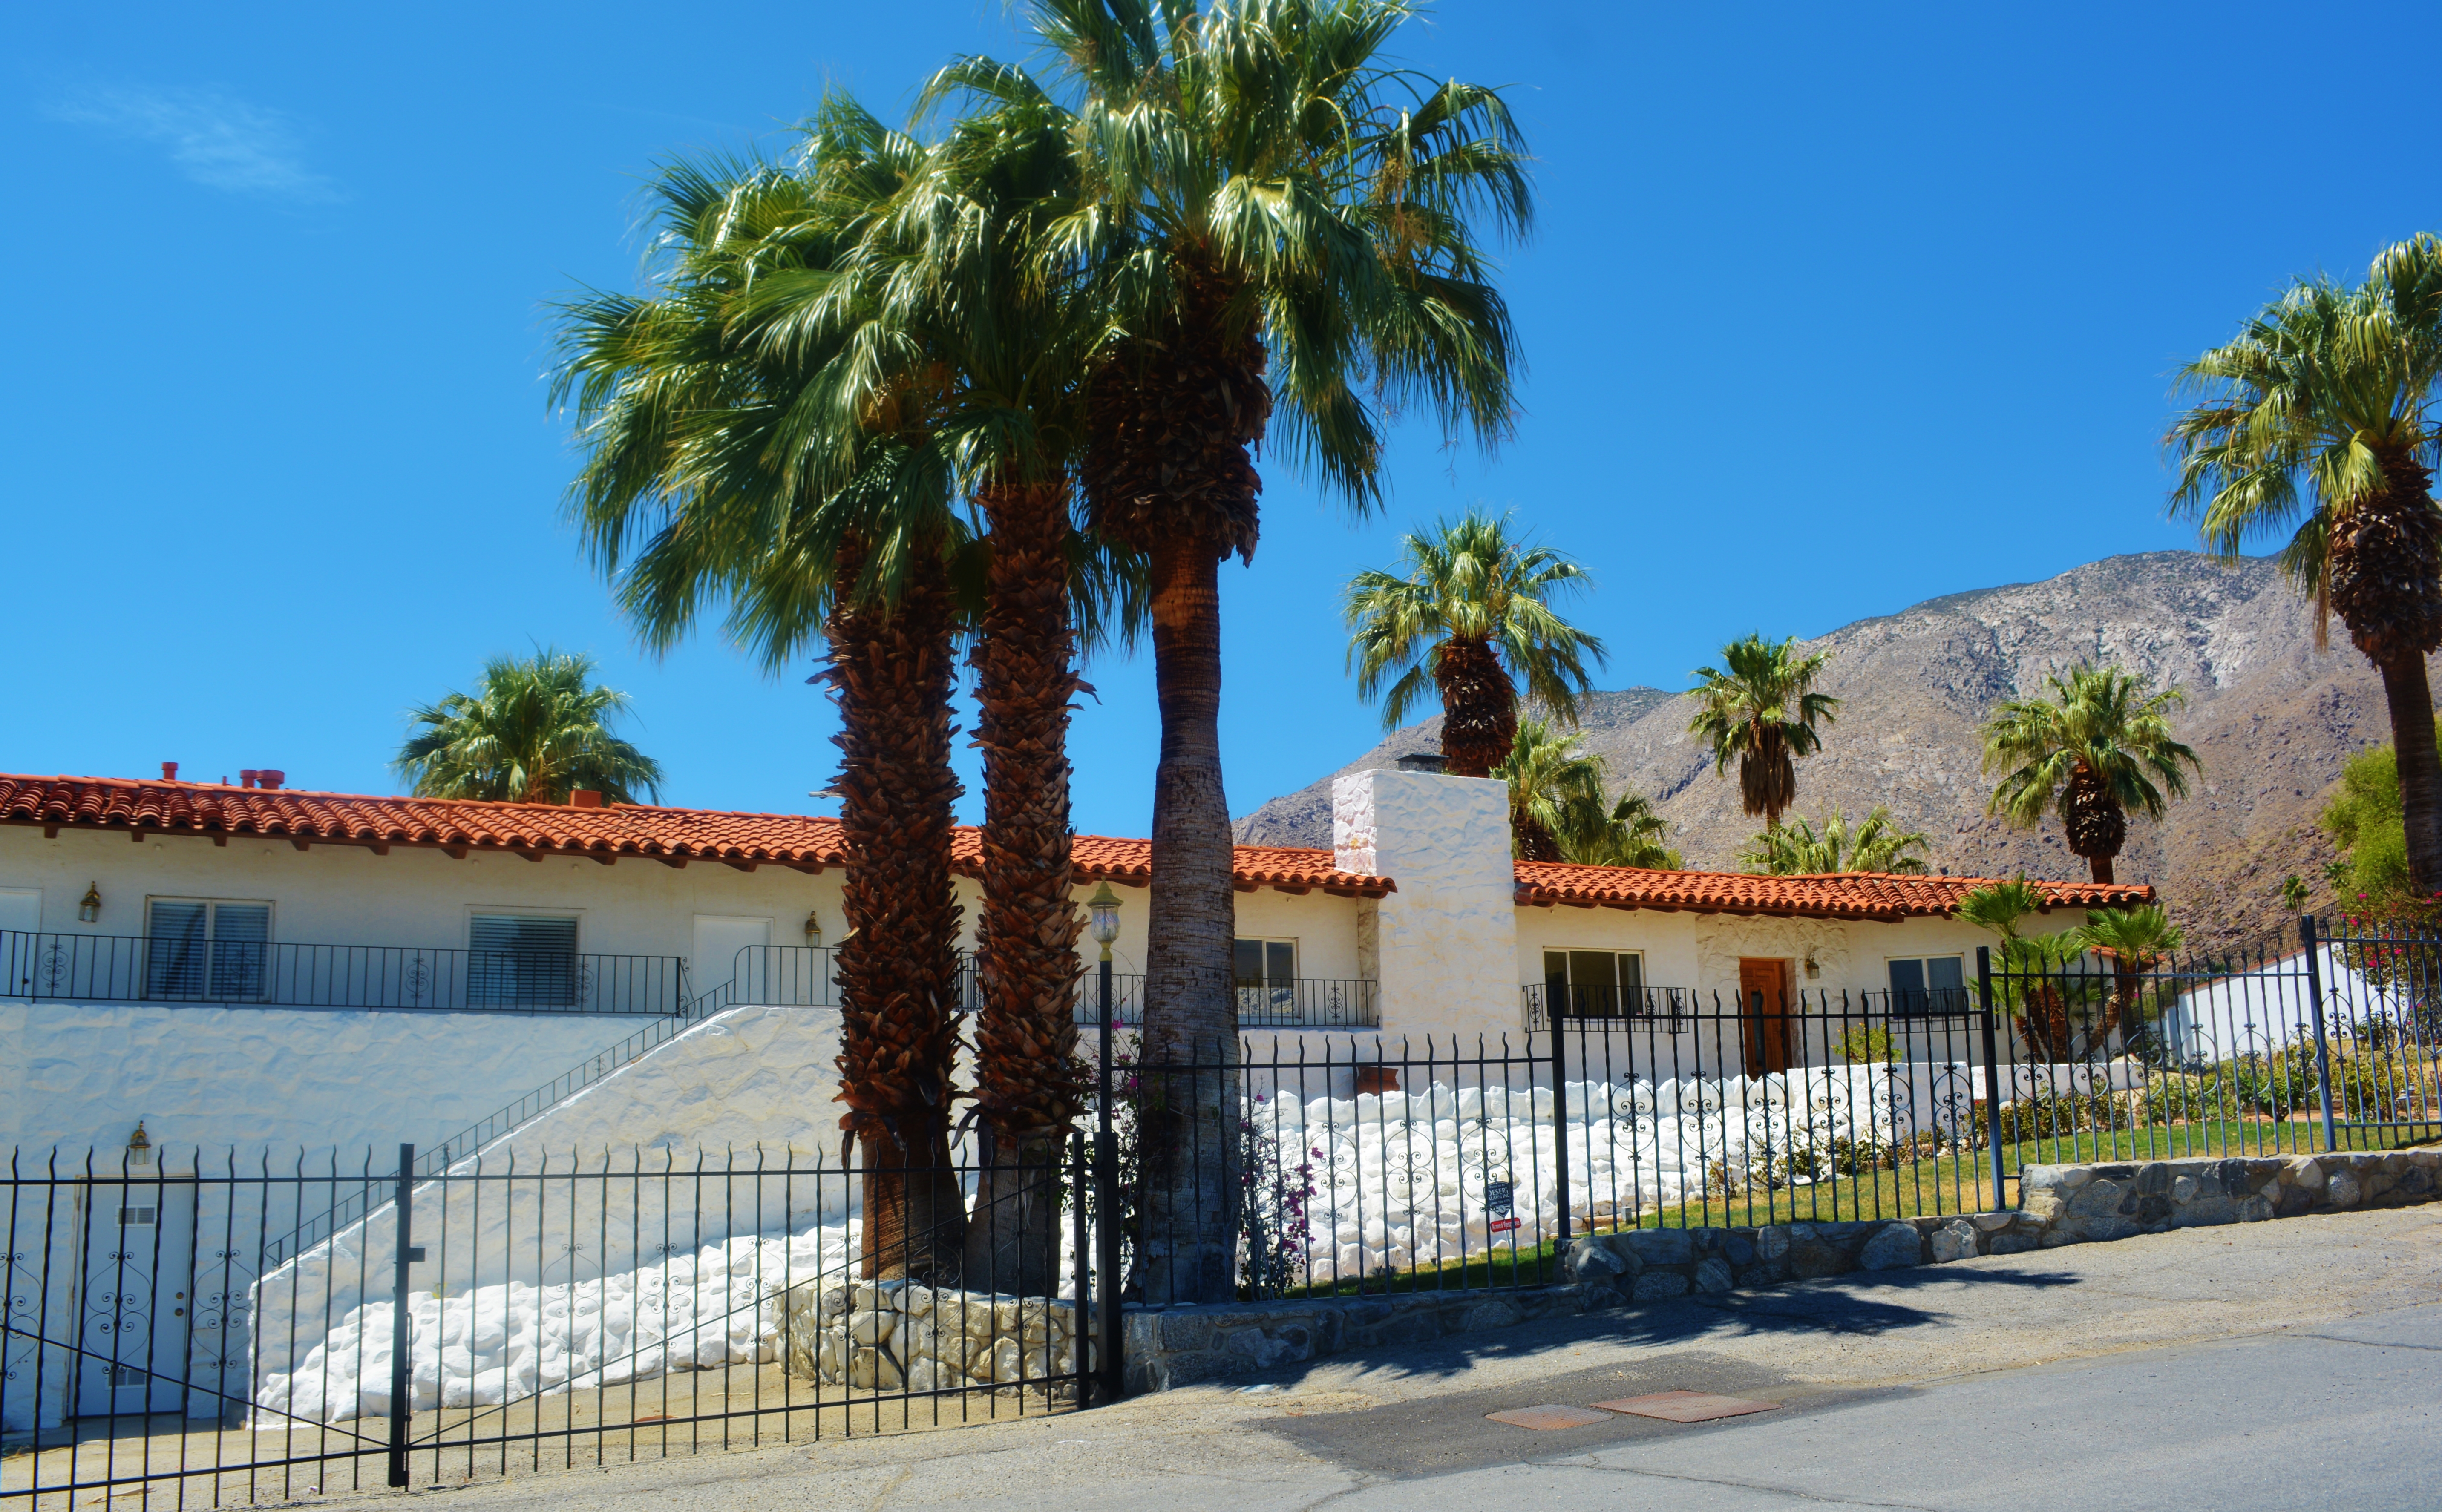 Elvis and Priscilla Presley's Home in Palm Springs